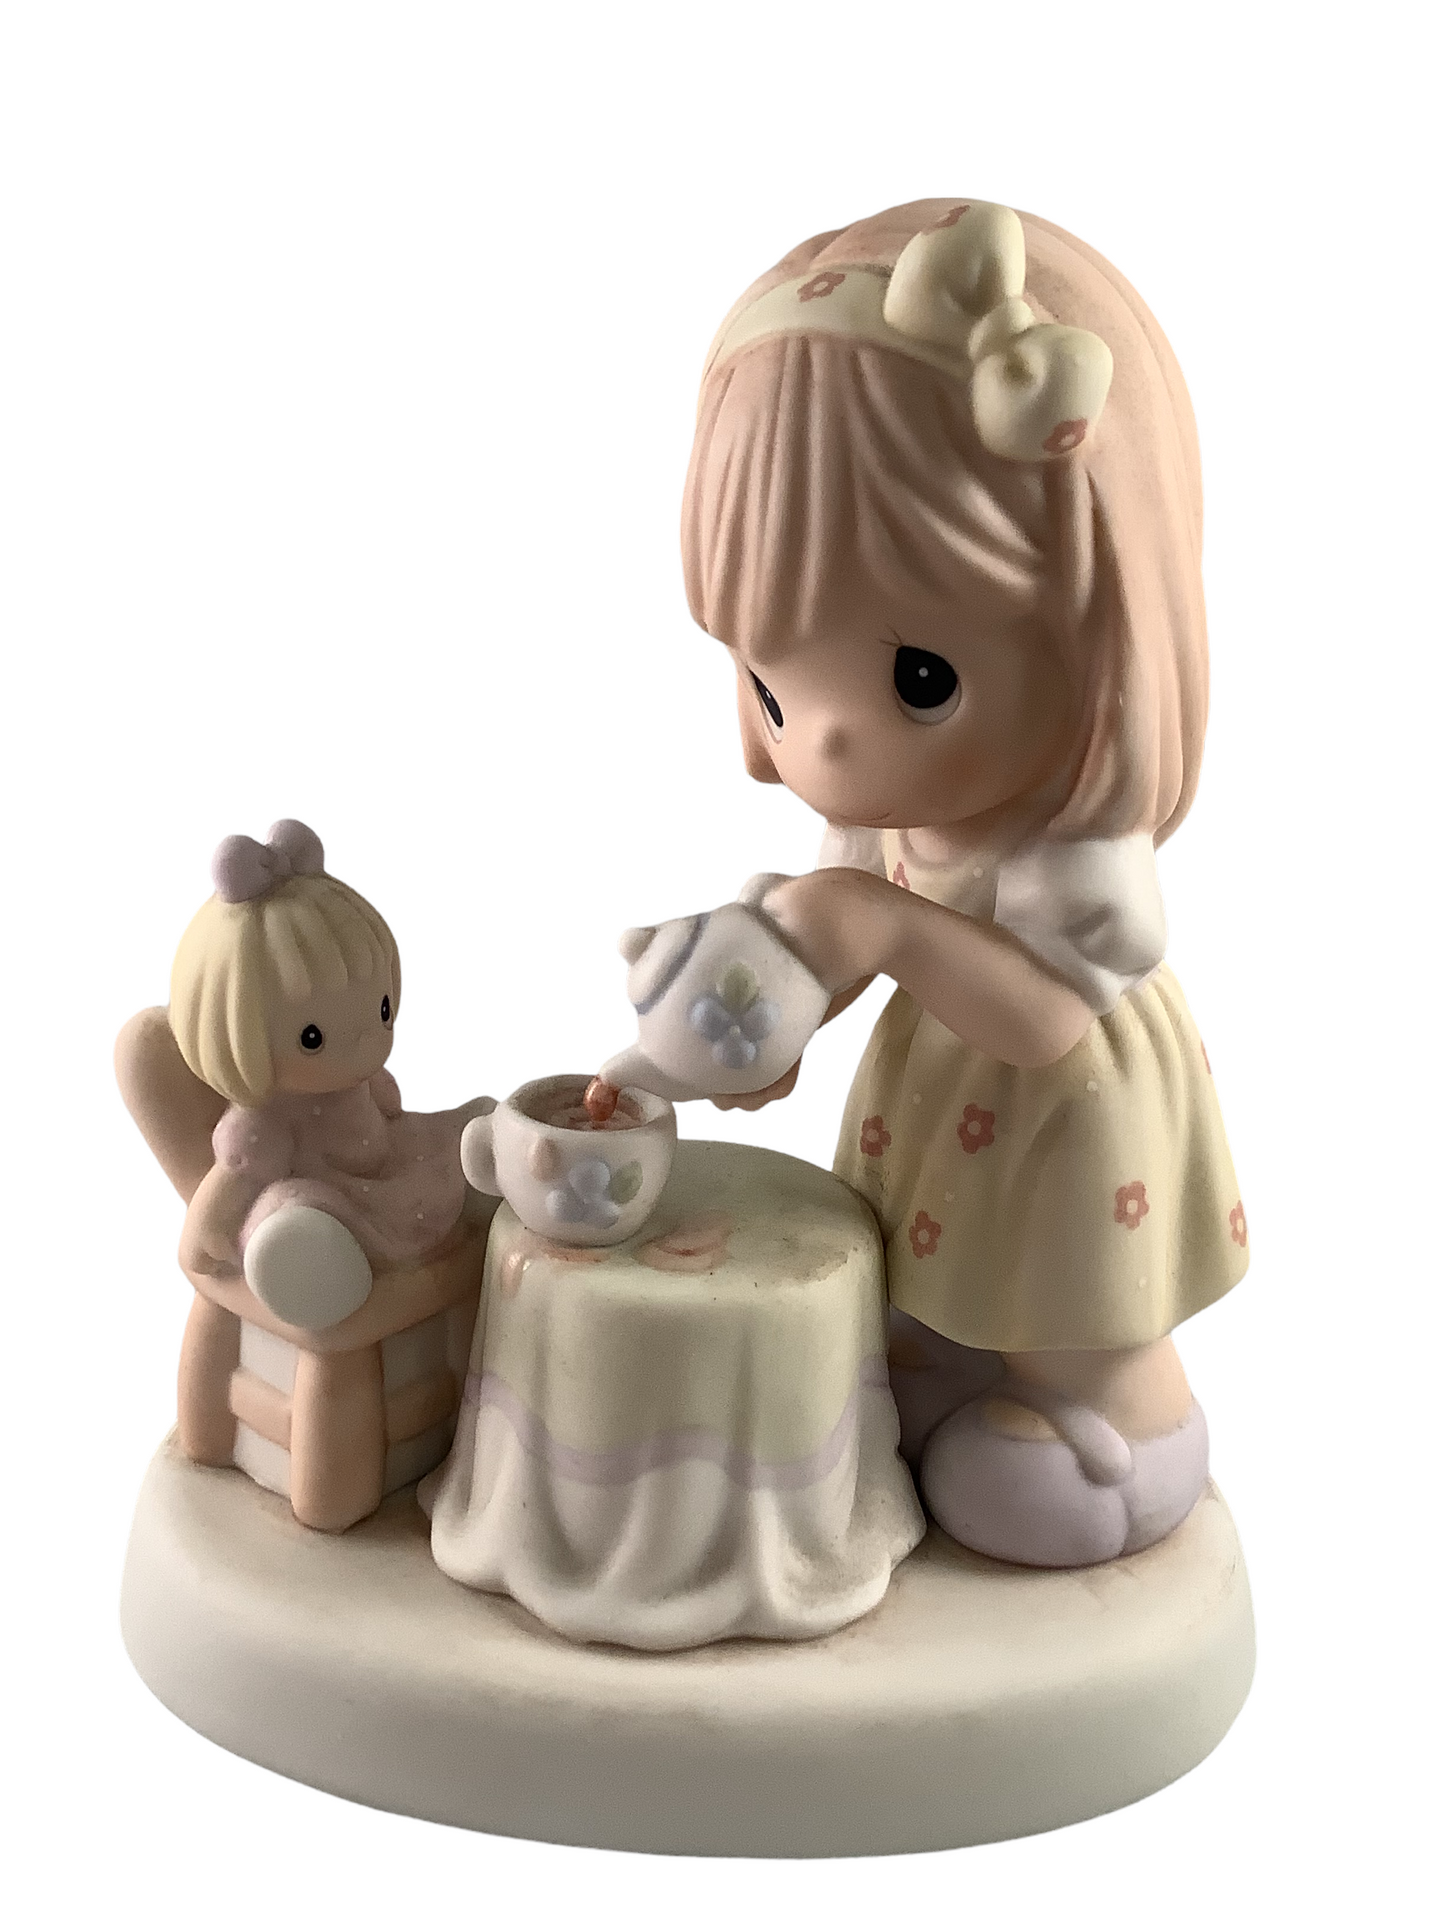 My Cup Runneth Over - Precious Moment Figurine